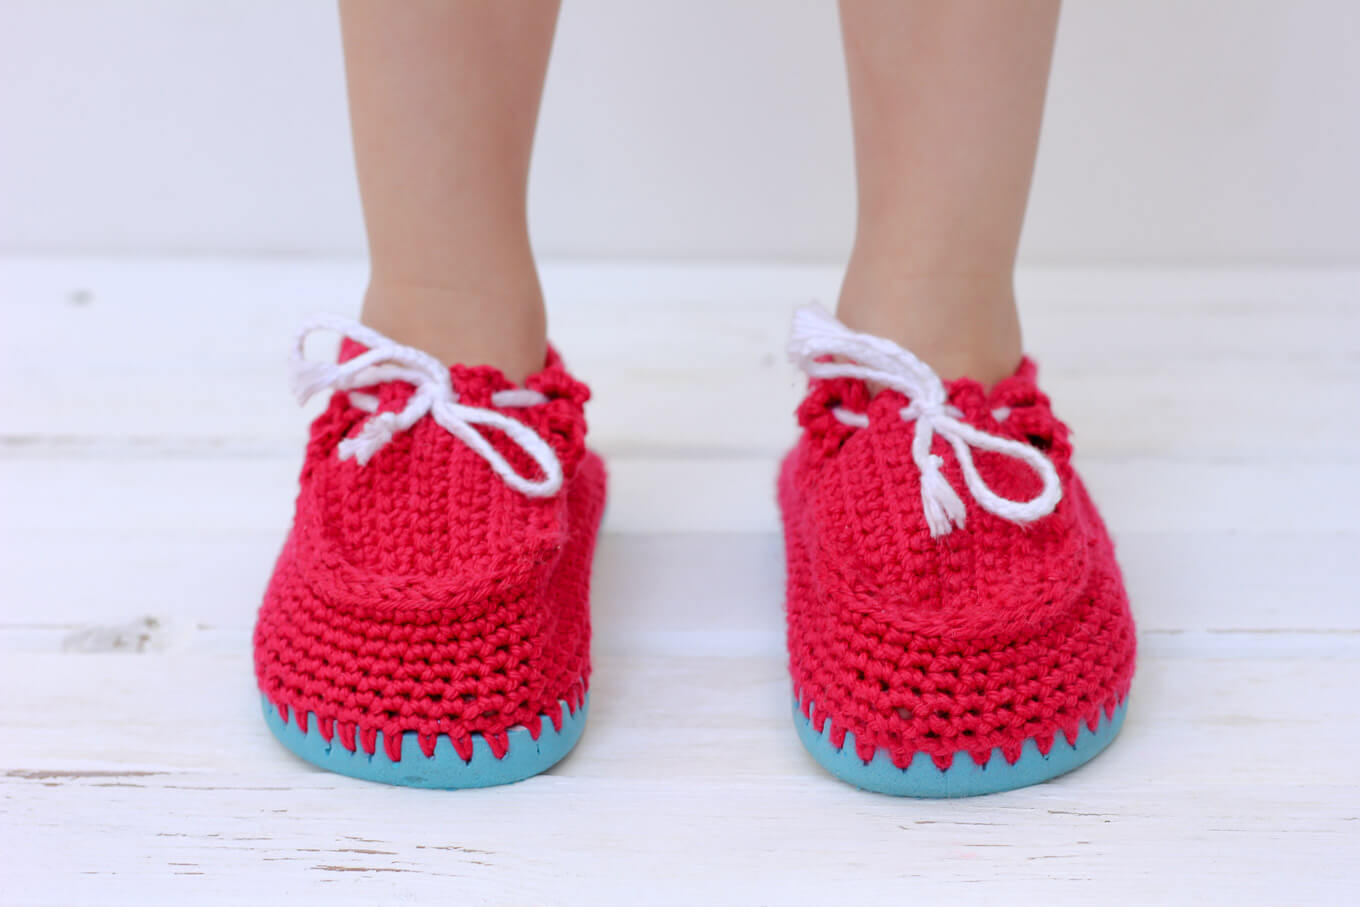 Crochet Slipper Patterns For Toddlers Crochet Toddler Boat Shoe Slippers With Flip Flop Soles Free